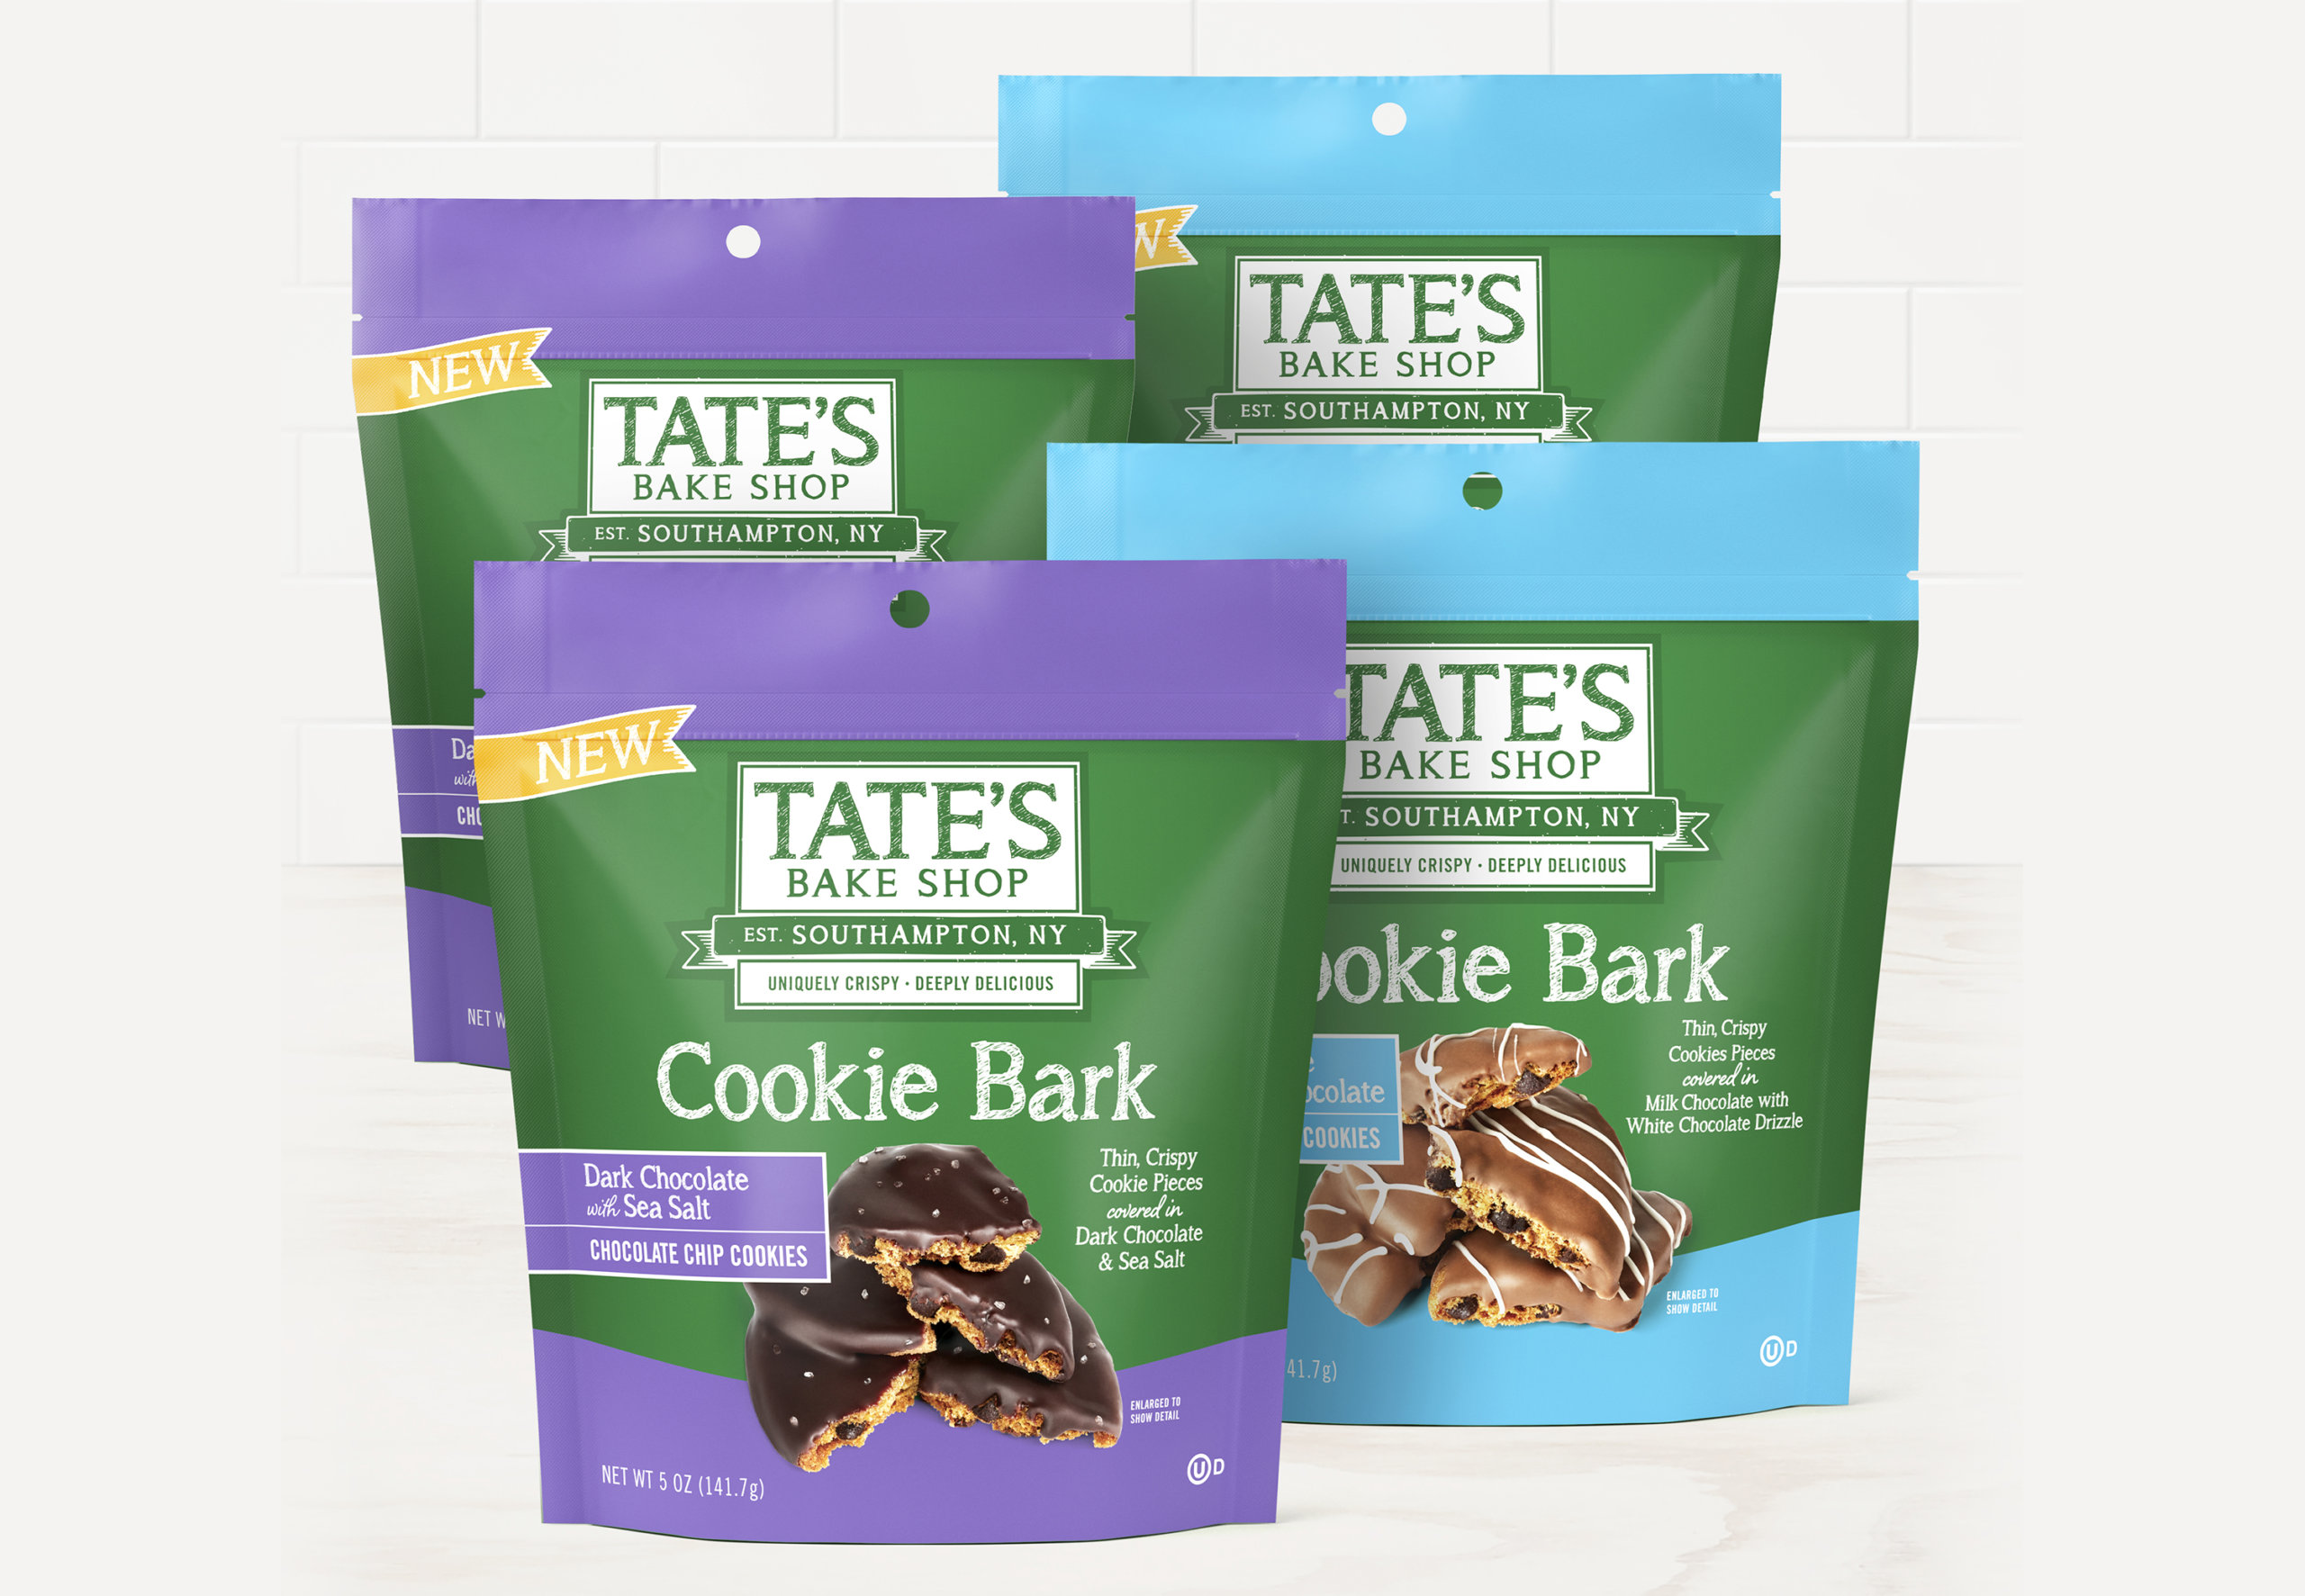 Tate's Bake Shop Cookie Bark in two flavors